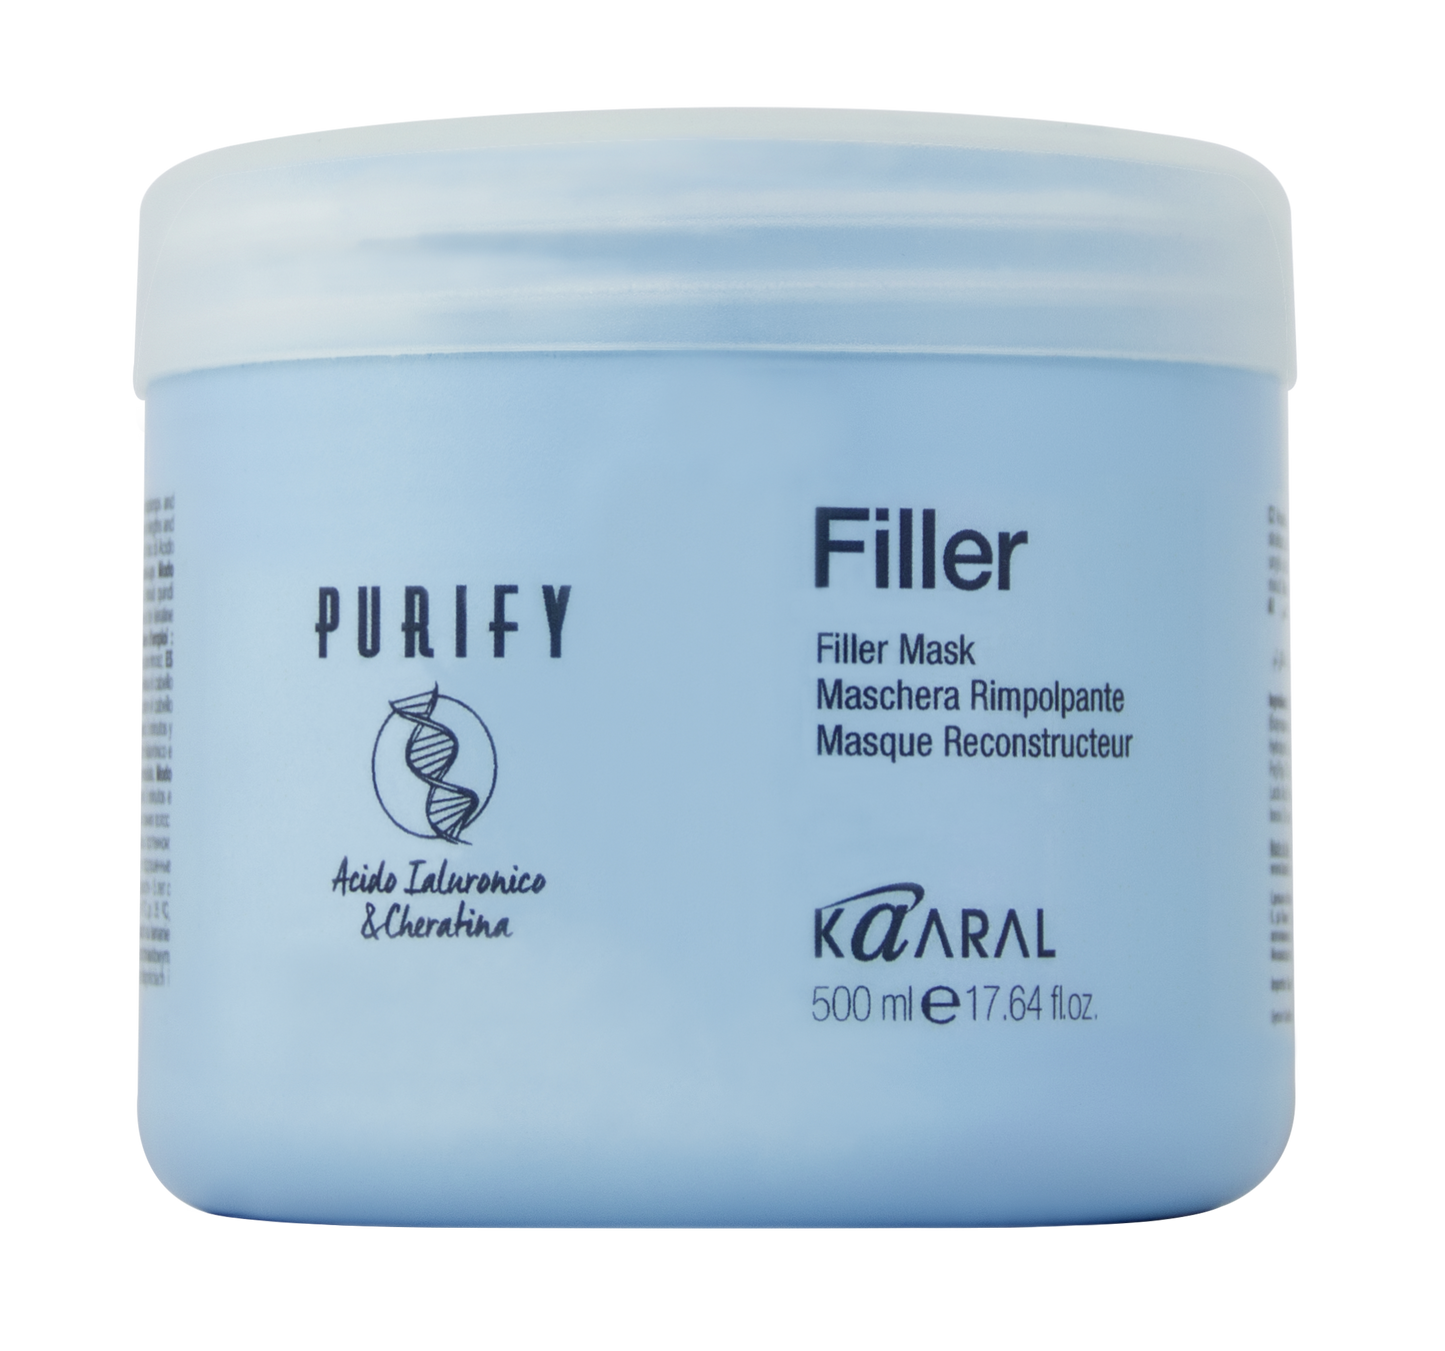 RETAIL PURIFY FILLER MASK